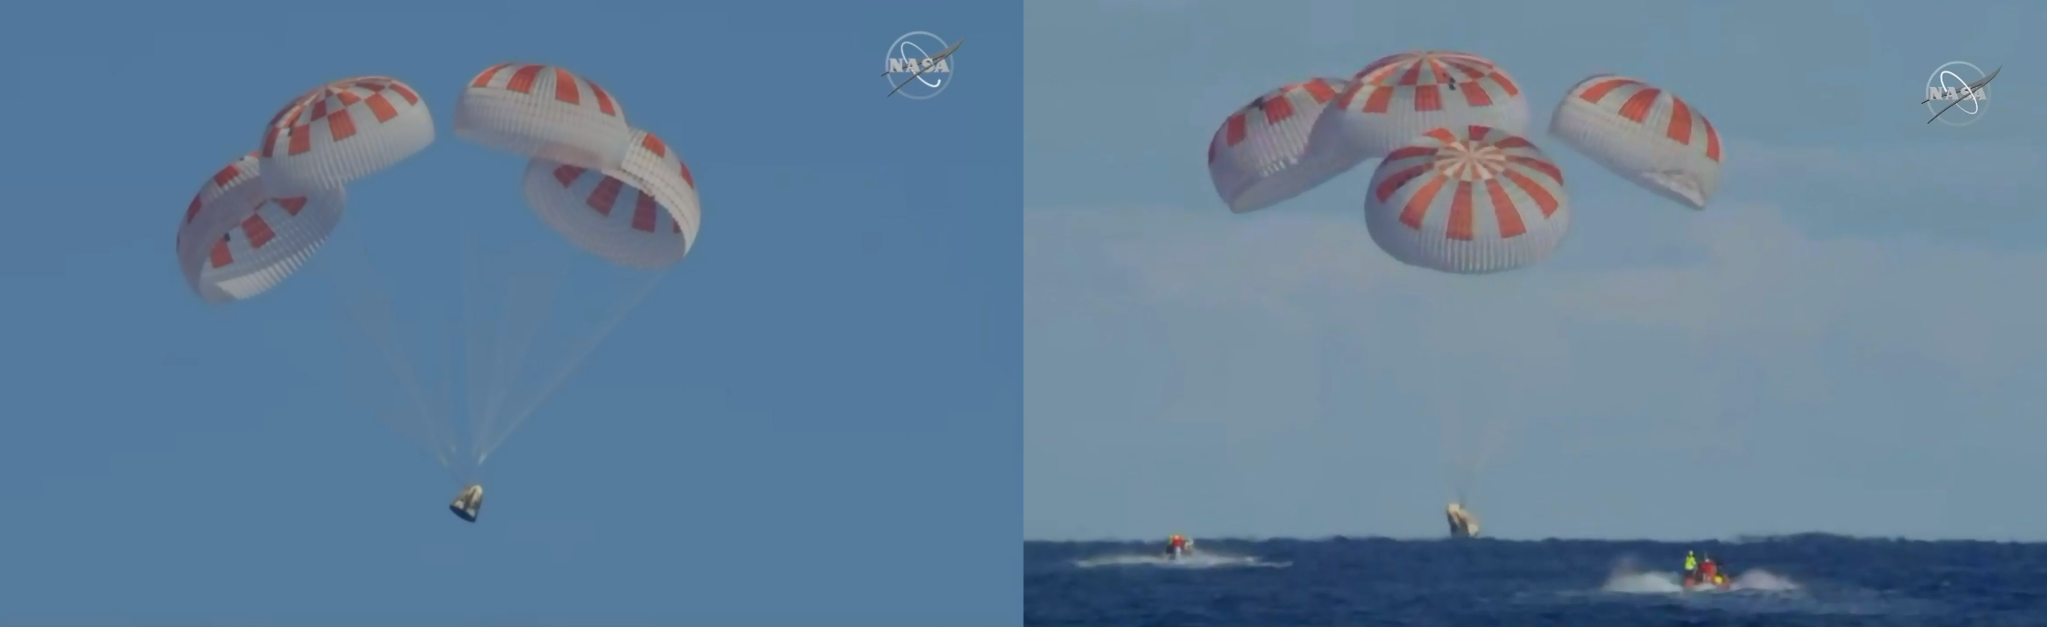 SpaceX’s Crew Dragon splashed down at 8:45 a.m. March 8, 2019, in the Atlantic Ocean